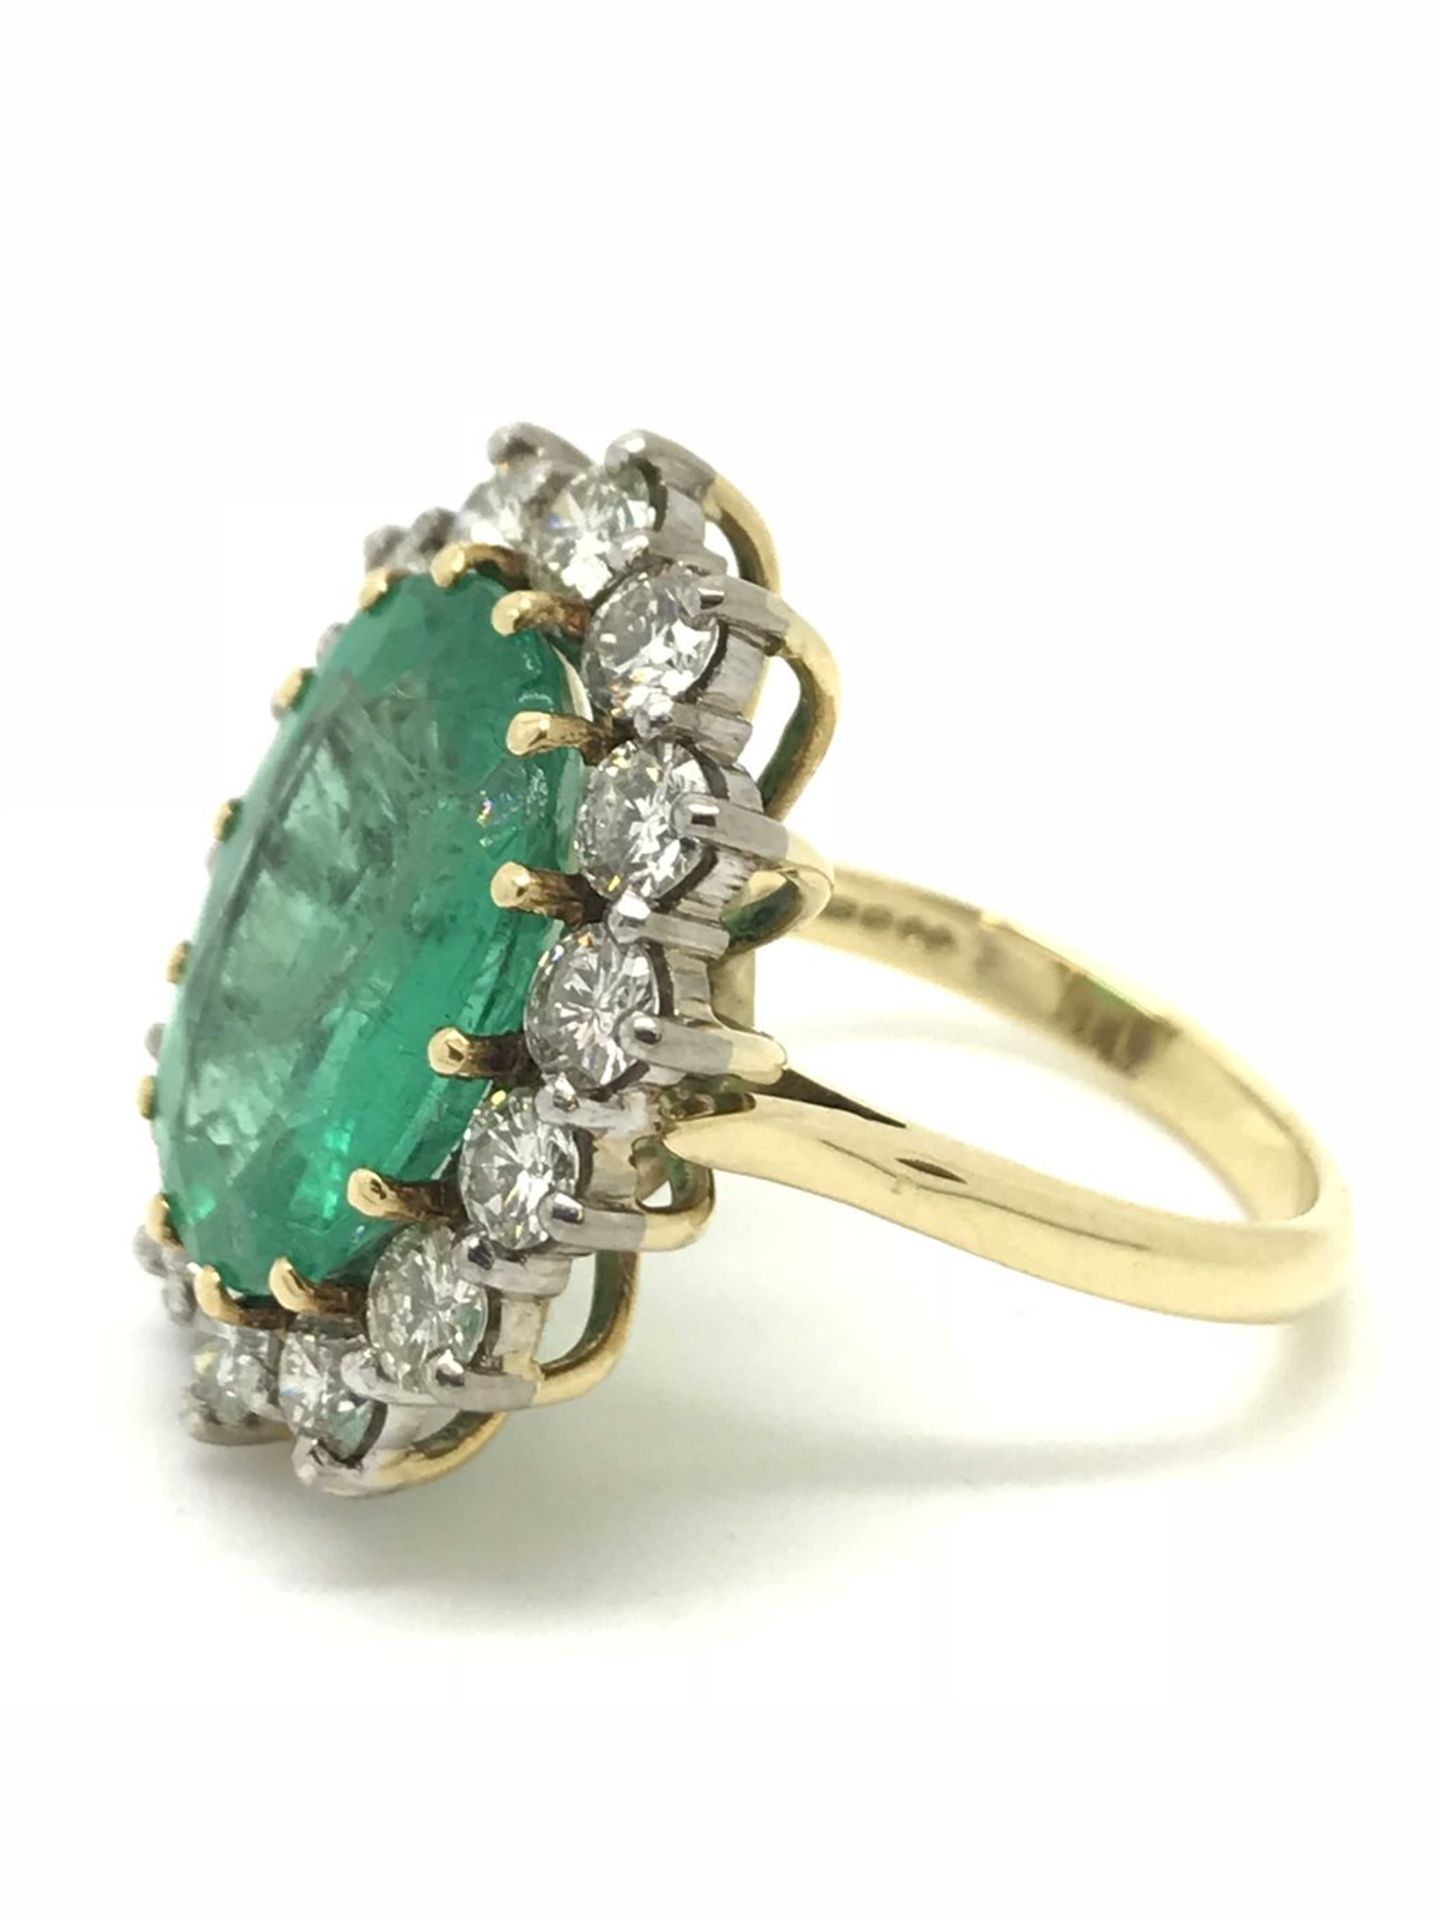 Emerald (6.93ct) & Diamond (2.10ct) Large Cluster Ring - 18ct Gold - Image 2 of 5